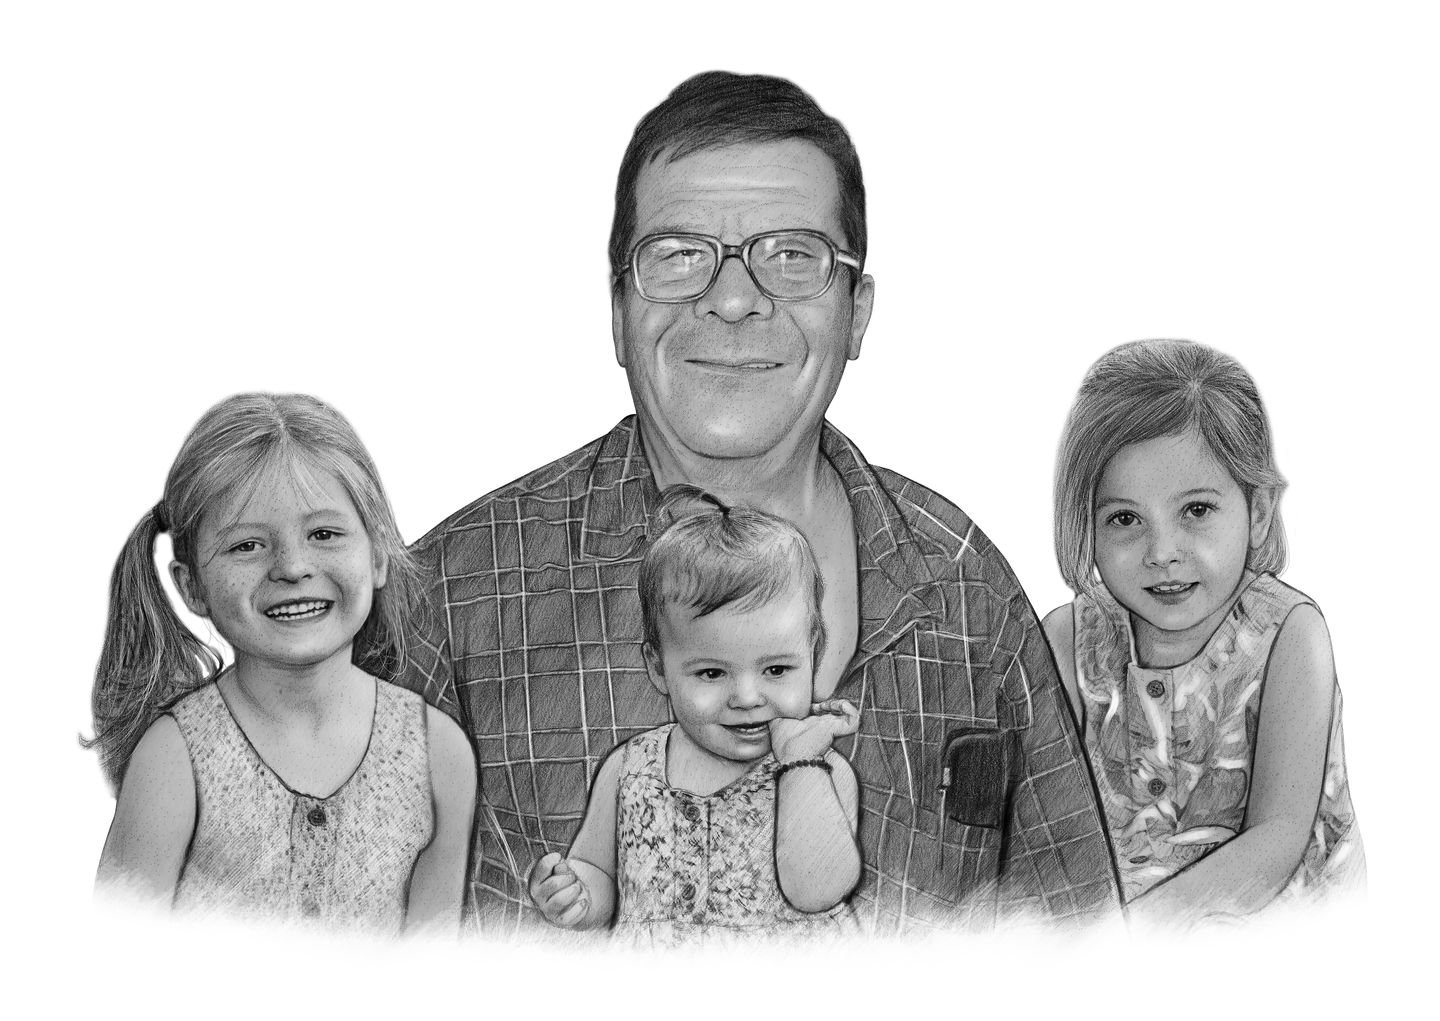 Charlie's Drawings' Emotional Family Portraits* - Charlie's Drawings